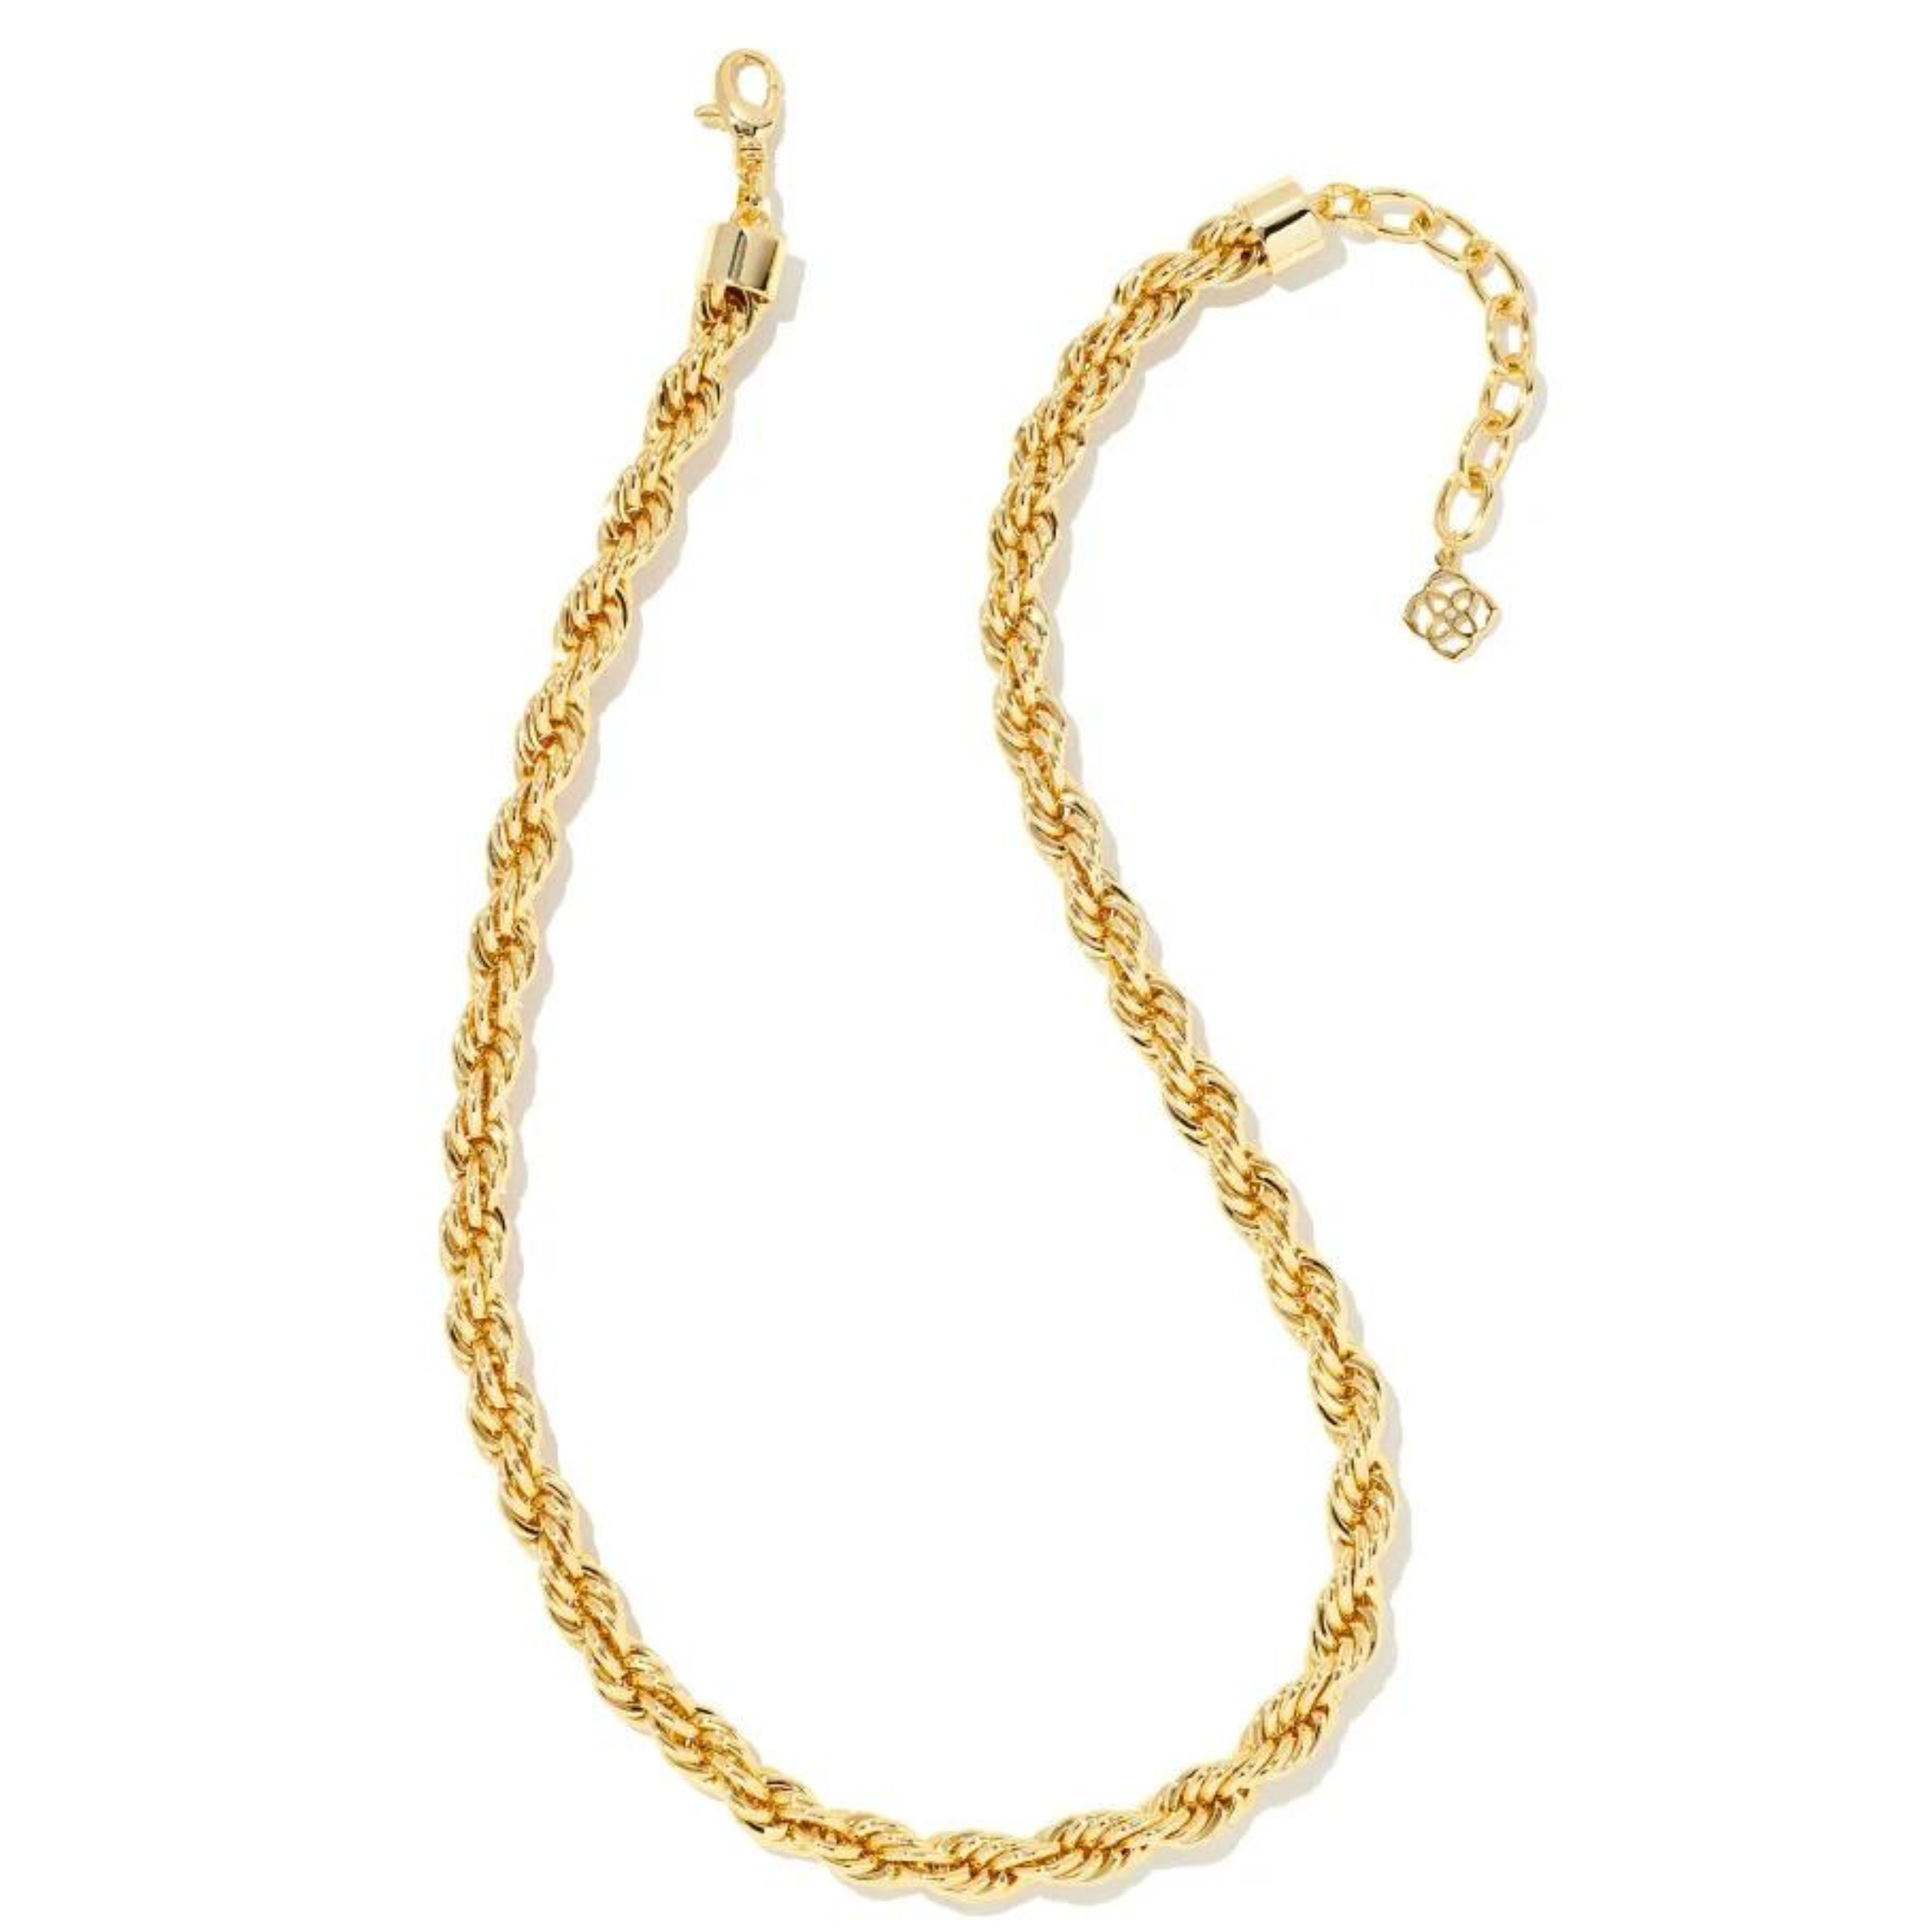 Gold rope chain necklace pictured on a white background. 